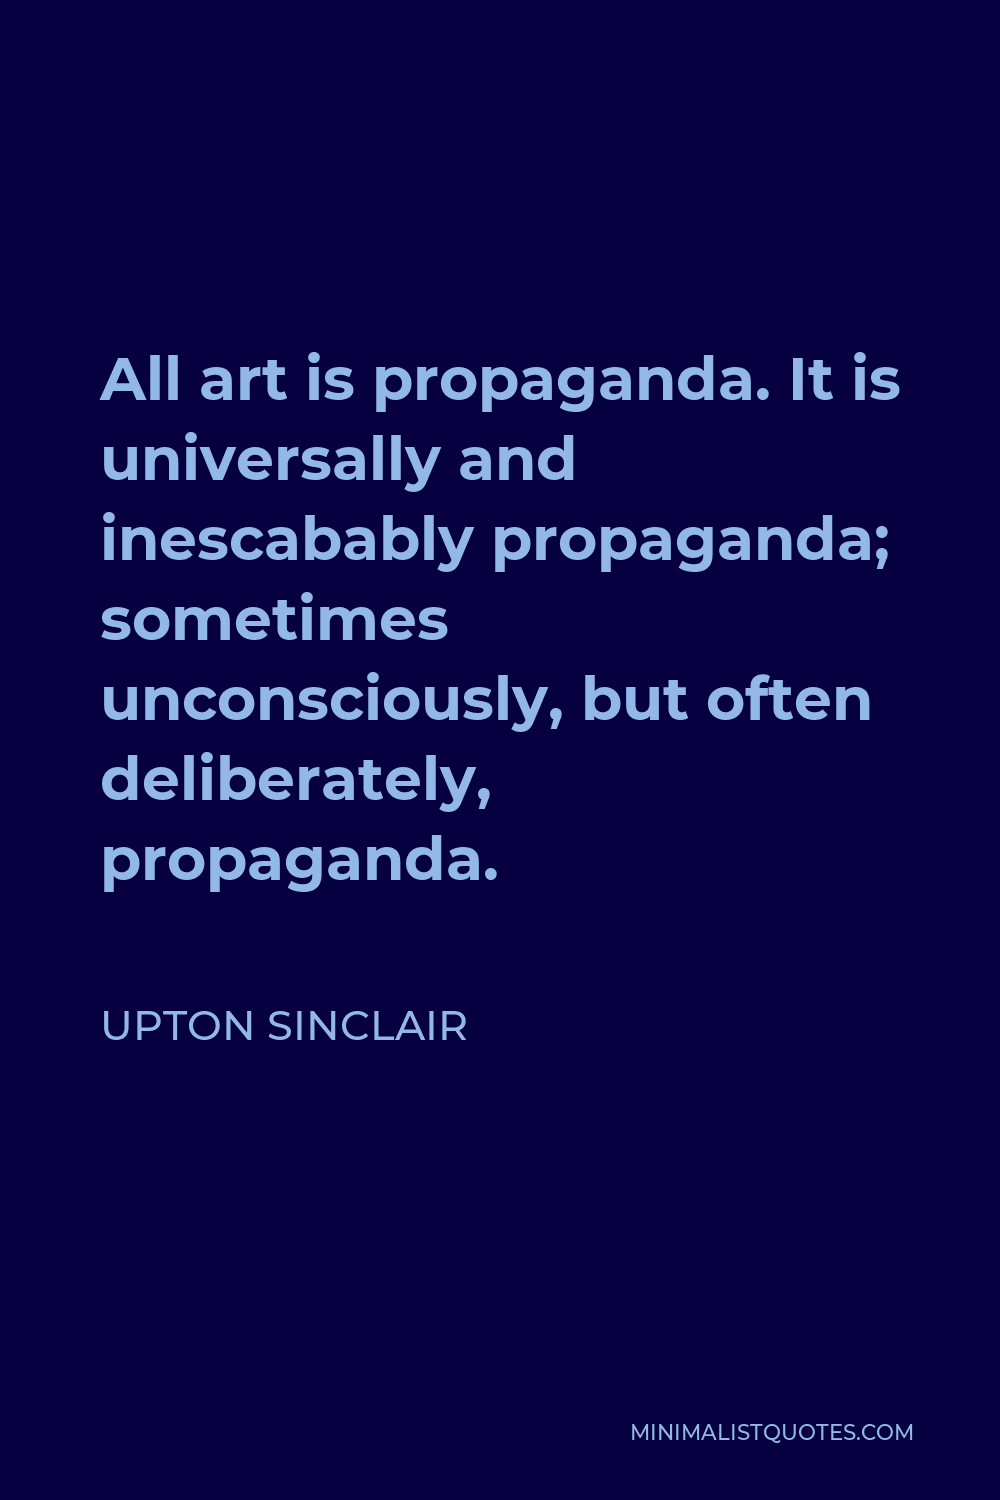 Upton Sinclair Quote - All art is propaganda. It is universally and inescabably propaganda; sometimes unconsciously, but often deliberately, propaganda.